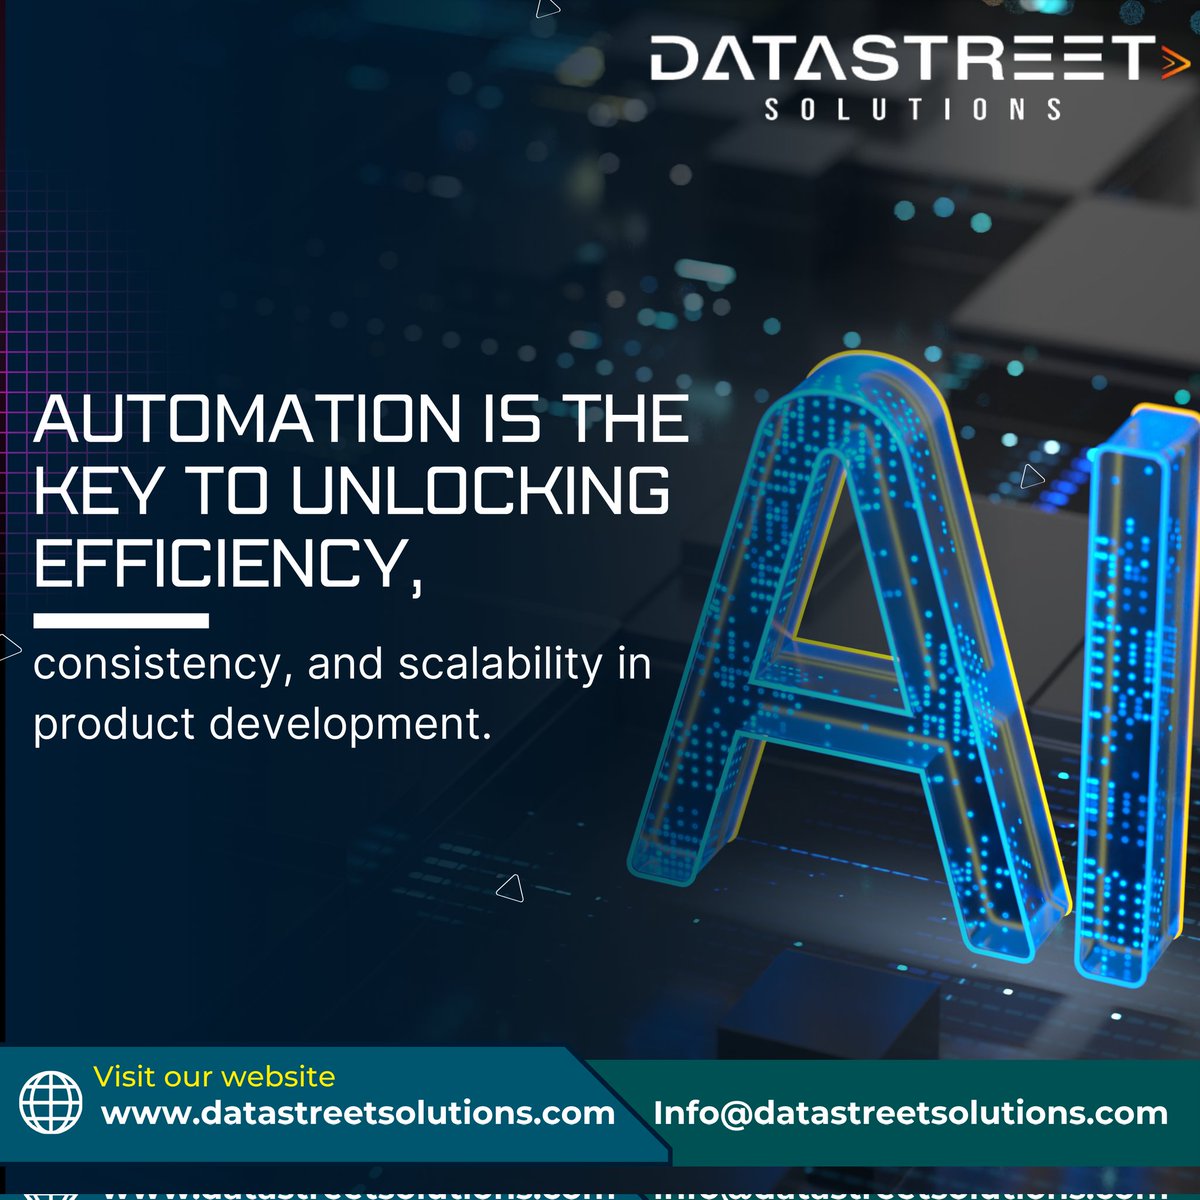 Automation drives efficiency, consistency and scalability in product development. Accelerate workflows and ensure standards with automation. Stay competitive in today's landscape. Reach out for more details info@datastreetsolutions.com 

#AI #itservices #Qa #DataEngineering